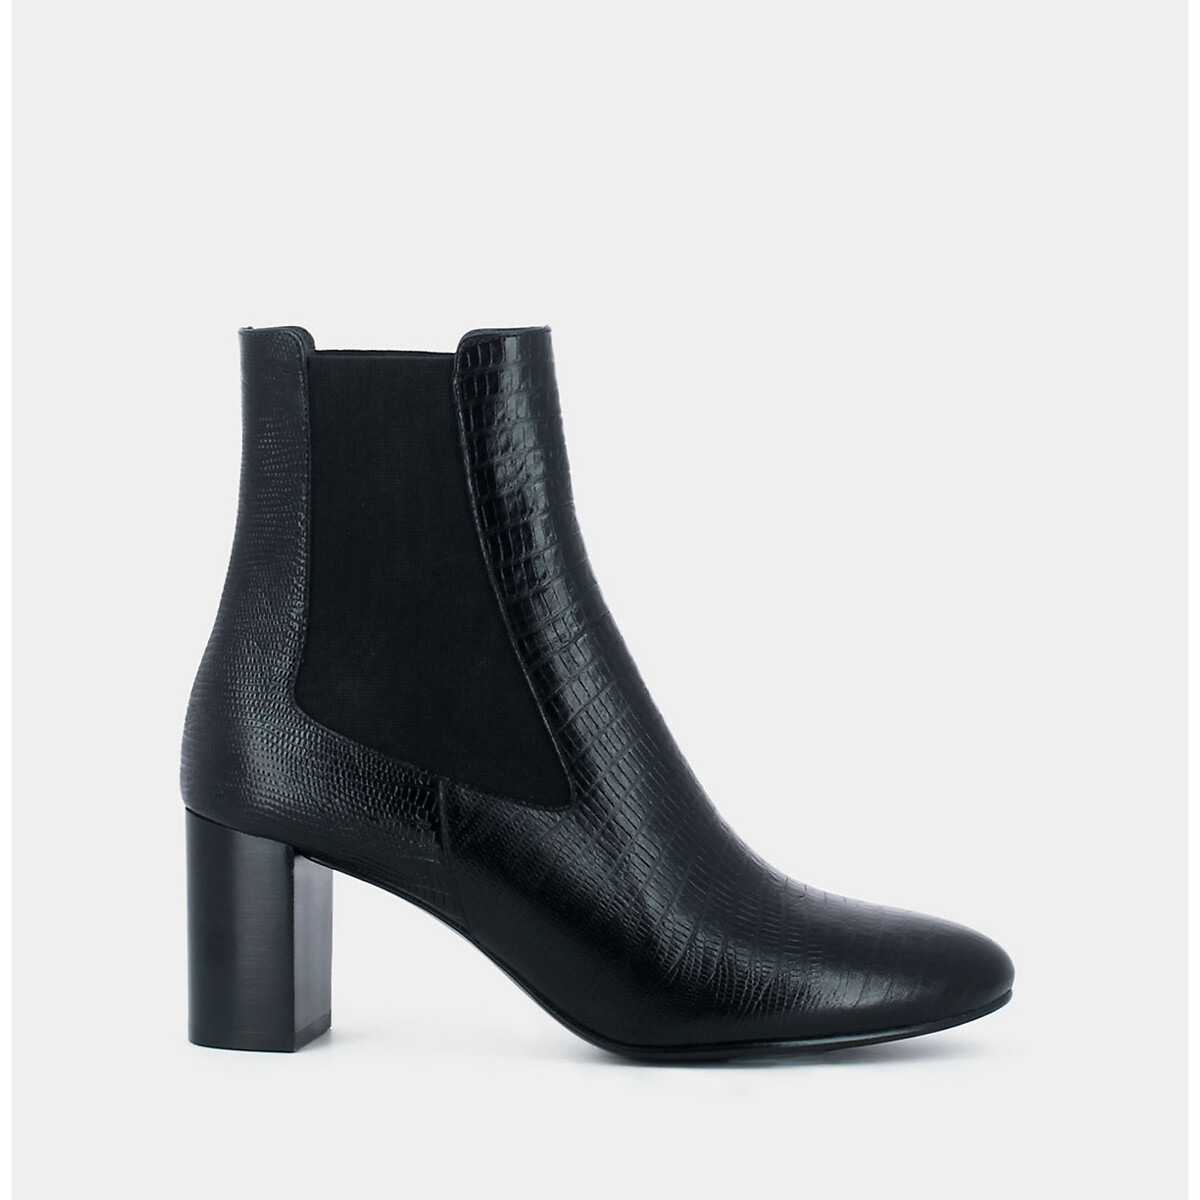 Duris Leather Chelsea Ankle Boots in Mock Croc with Block Heel